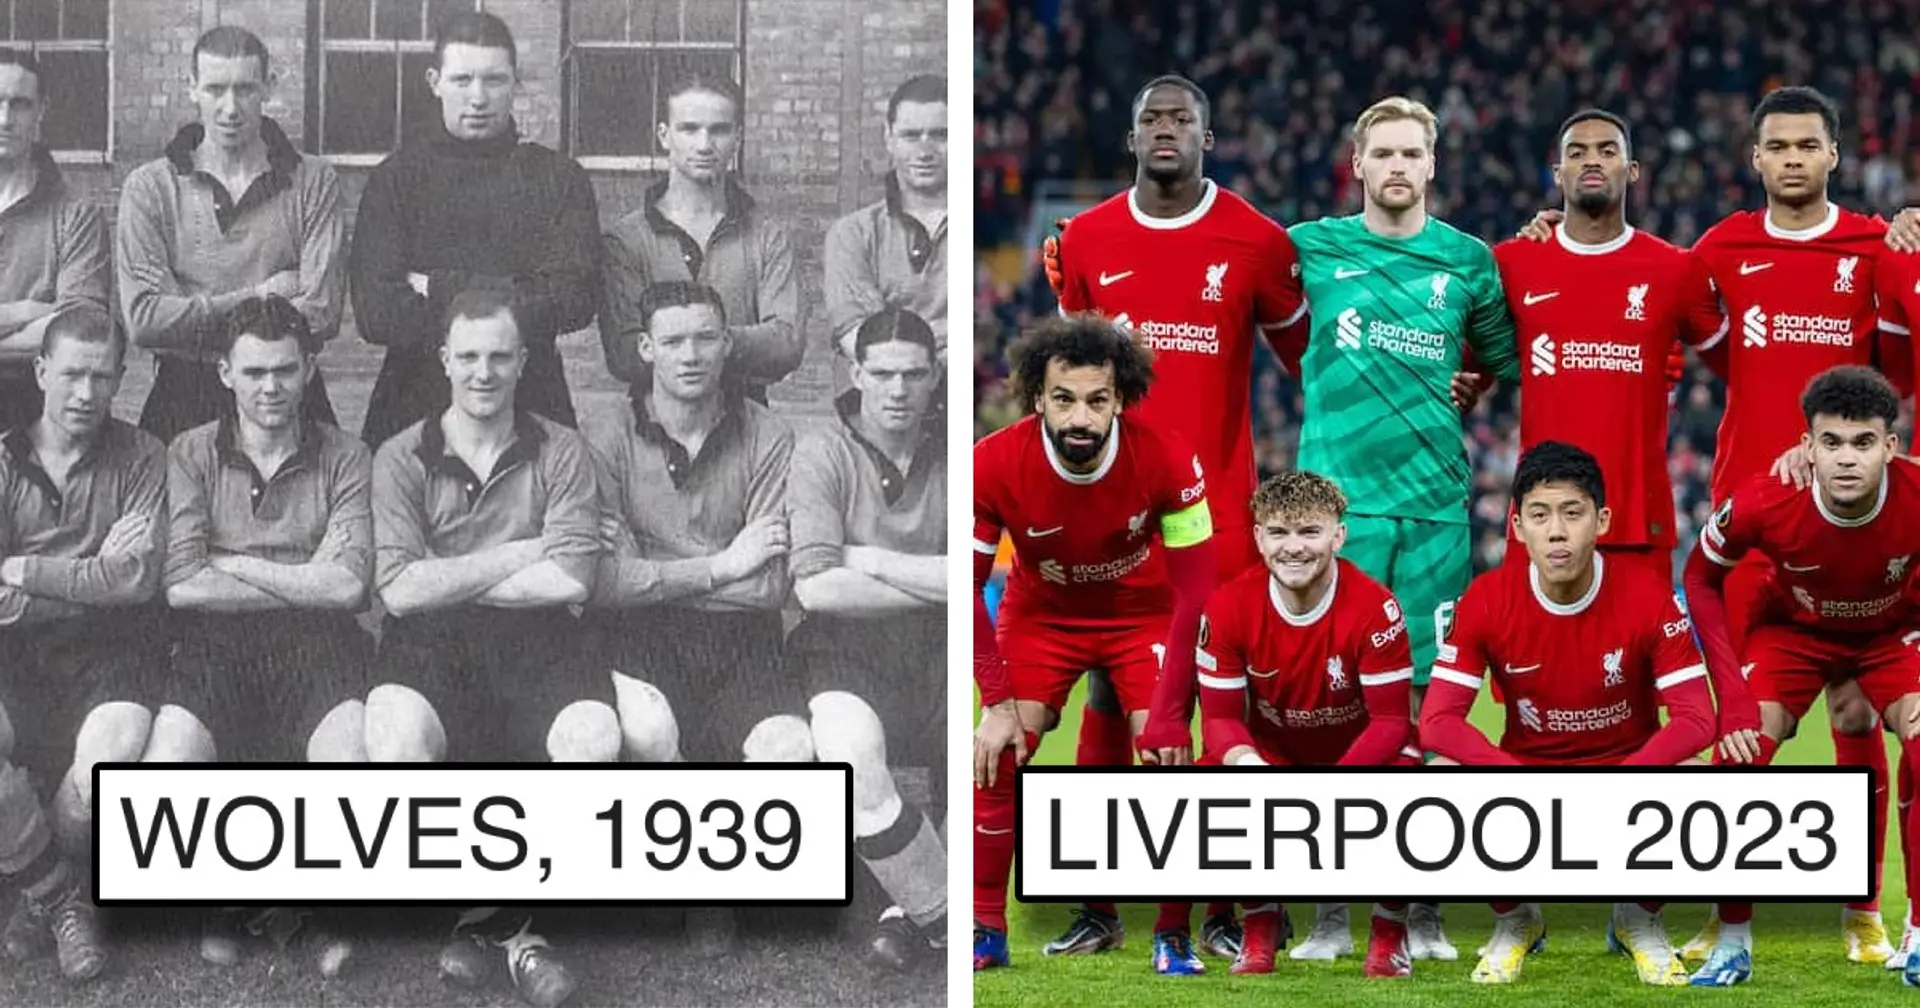 Liverpool become first team to reach incredible milestone matched only by one other English top-flight team